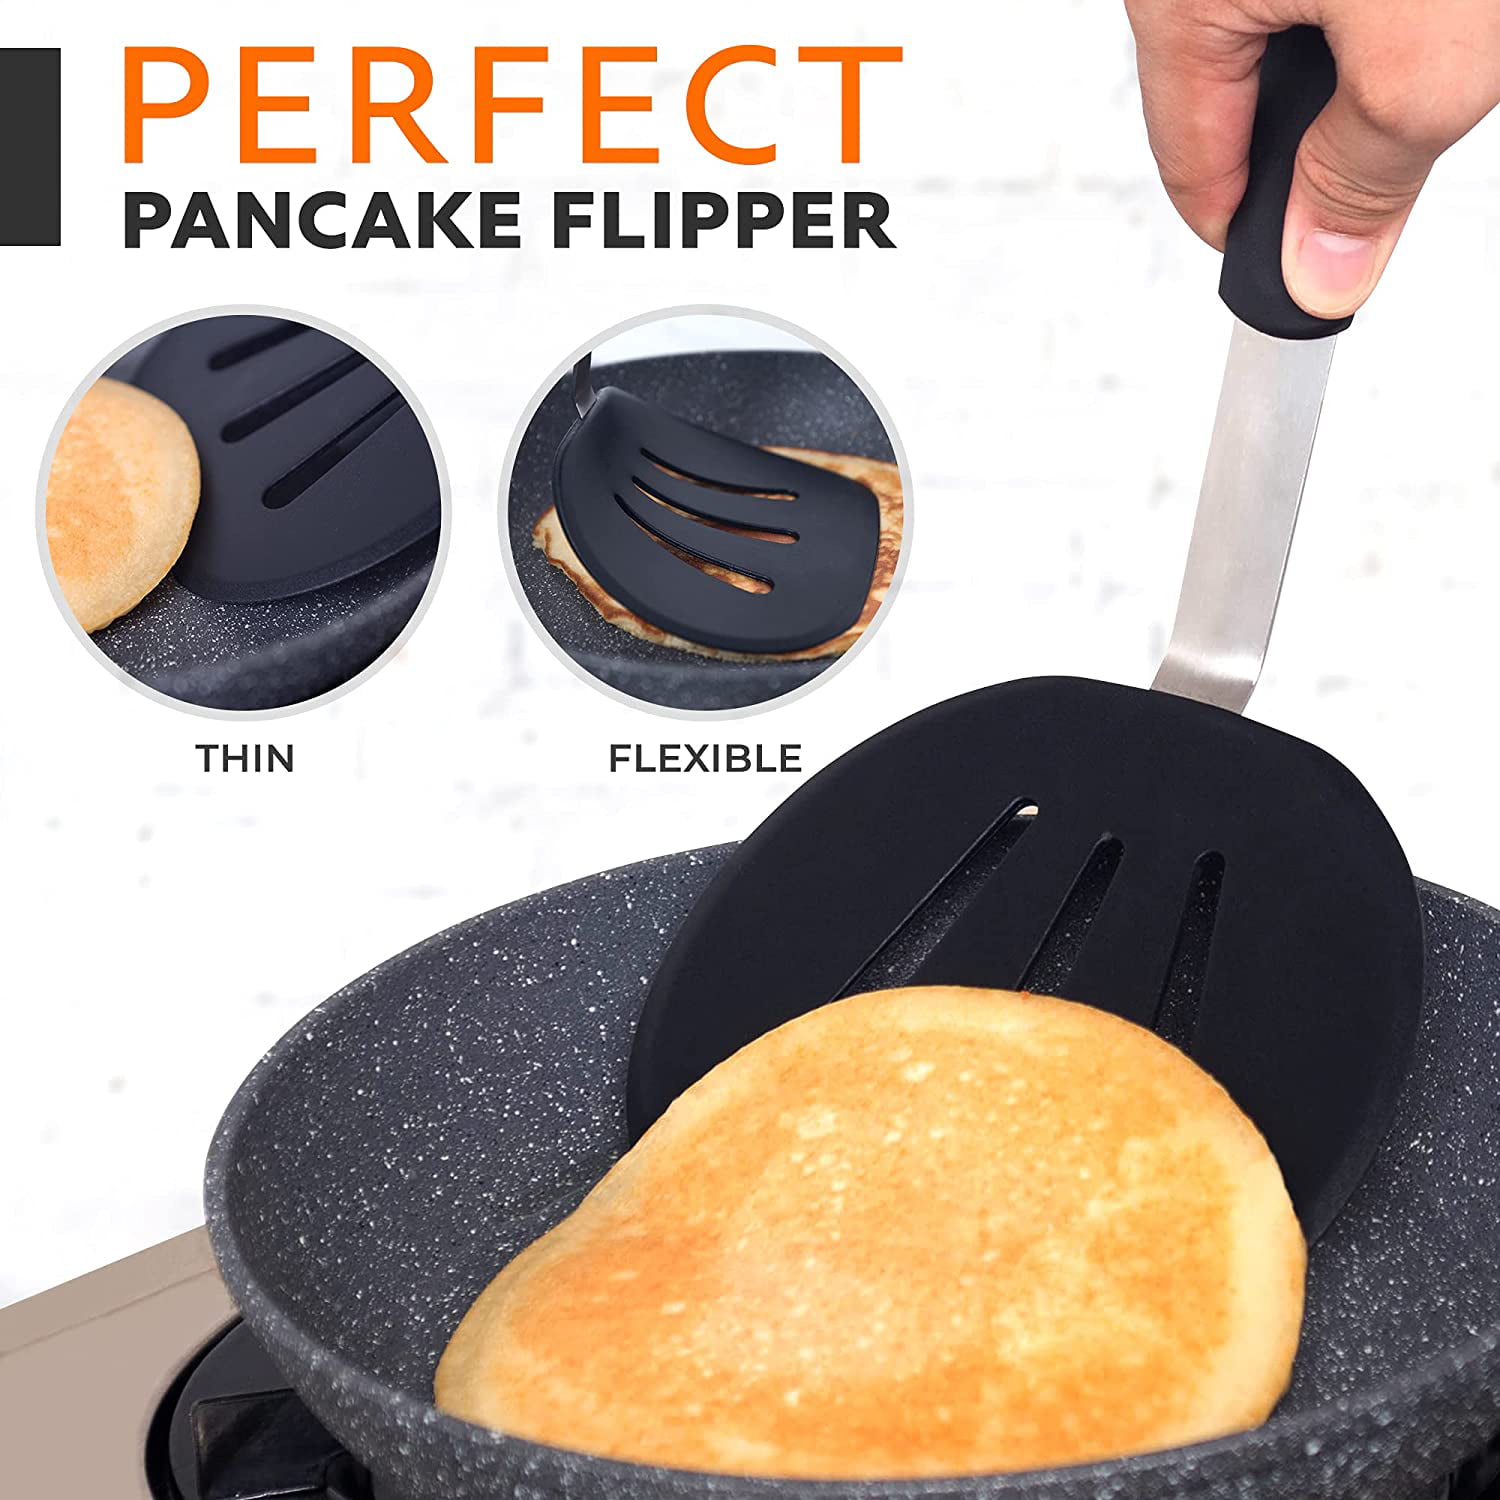 STAUB Silicone Spatula Turner, Perfectly Angled for Lifting Pancakes,  Sandwiches and Picking up Vegg…See more STAUB Silicone Spatula Turner,  Perfectly